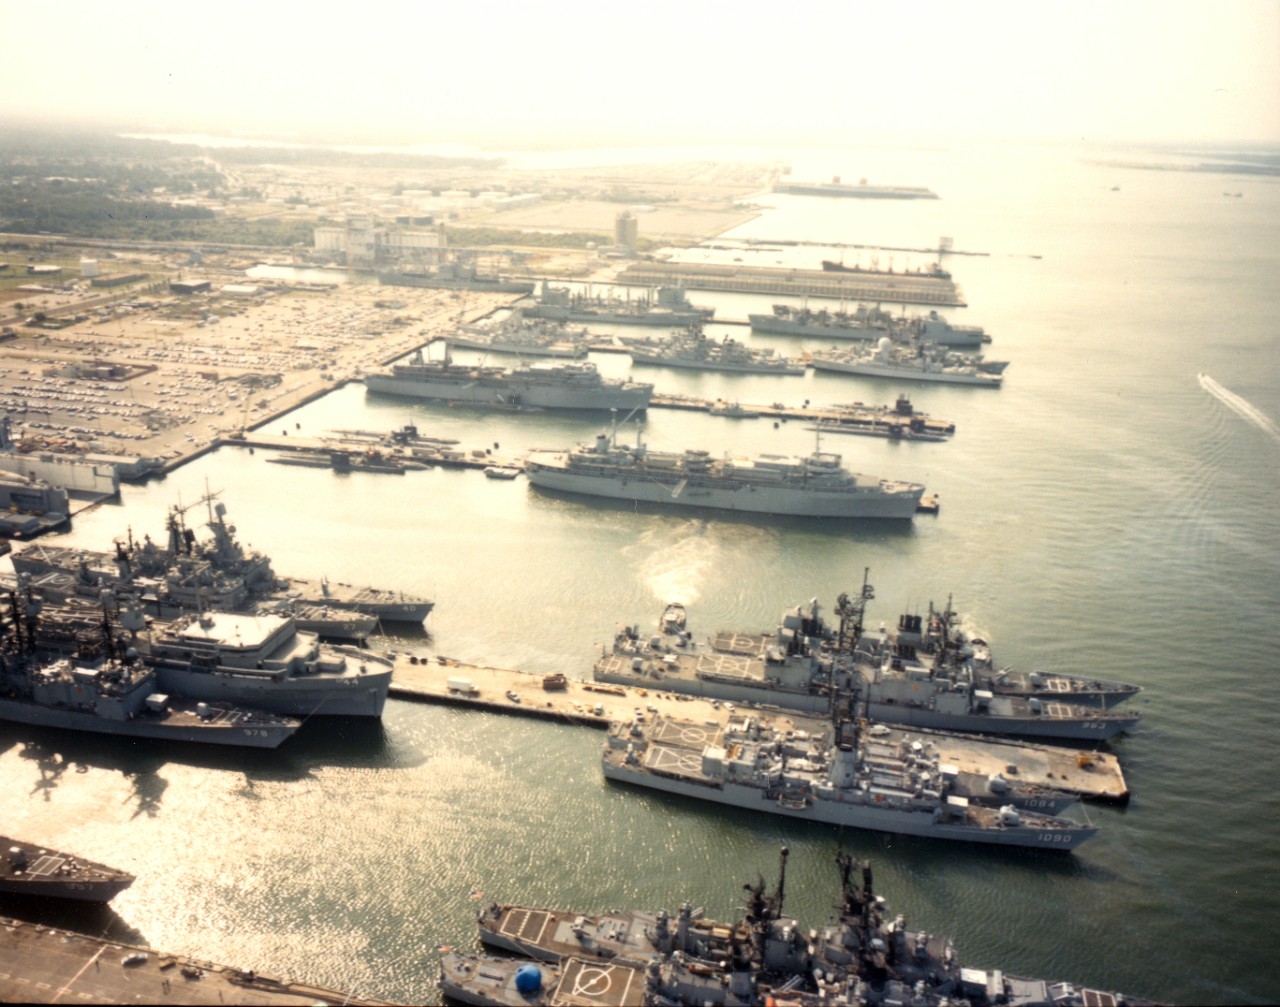 Naval Station, Norfolk, VA - an aerial view of the destroyer and submarine piers (Nos. 22 and 23) with various ships at anchor, including destroyers, frigates, cruisers, destroyers and submarine tenders and submarines. October 1984. 